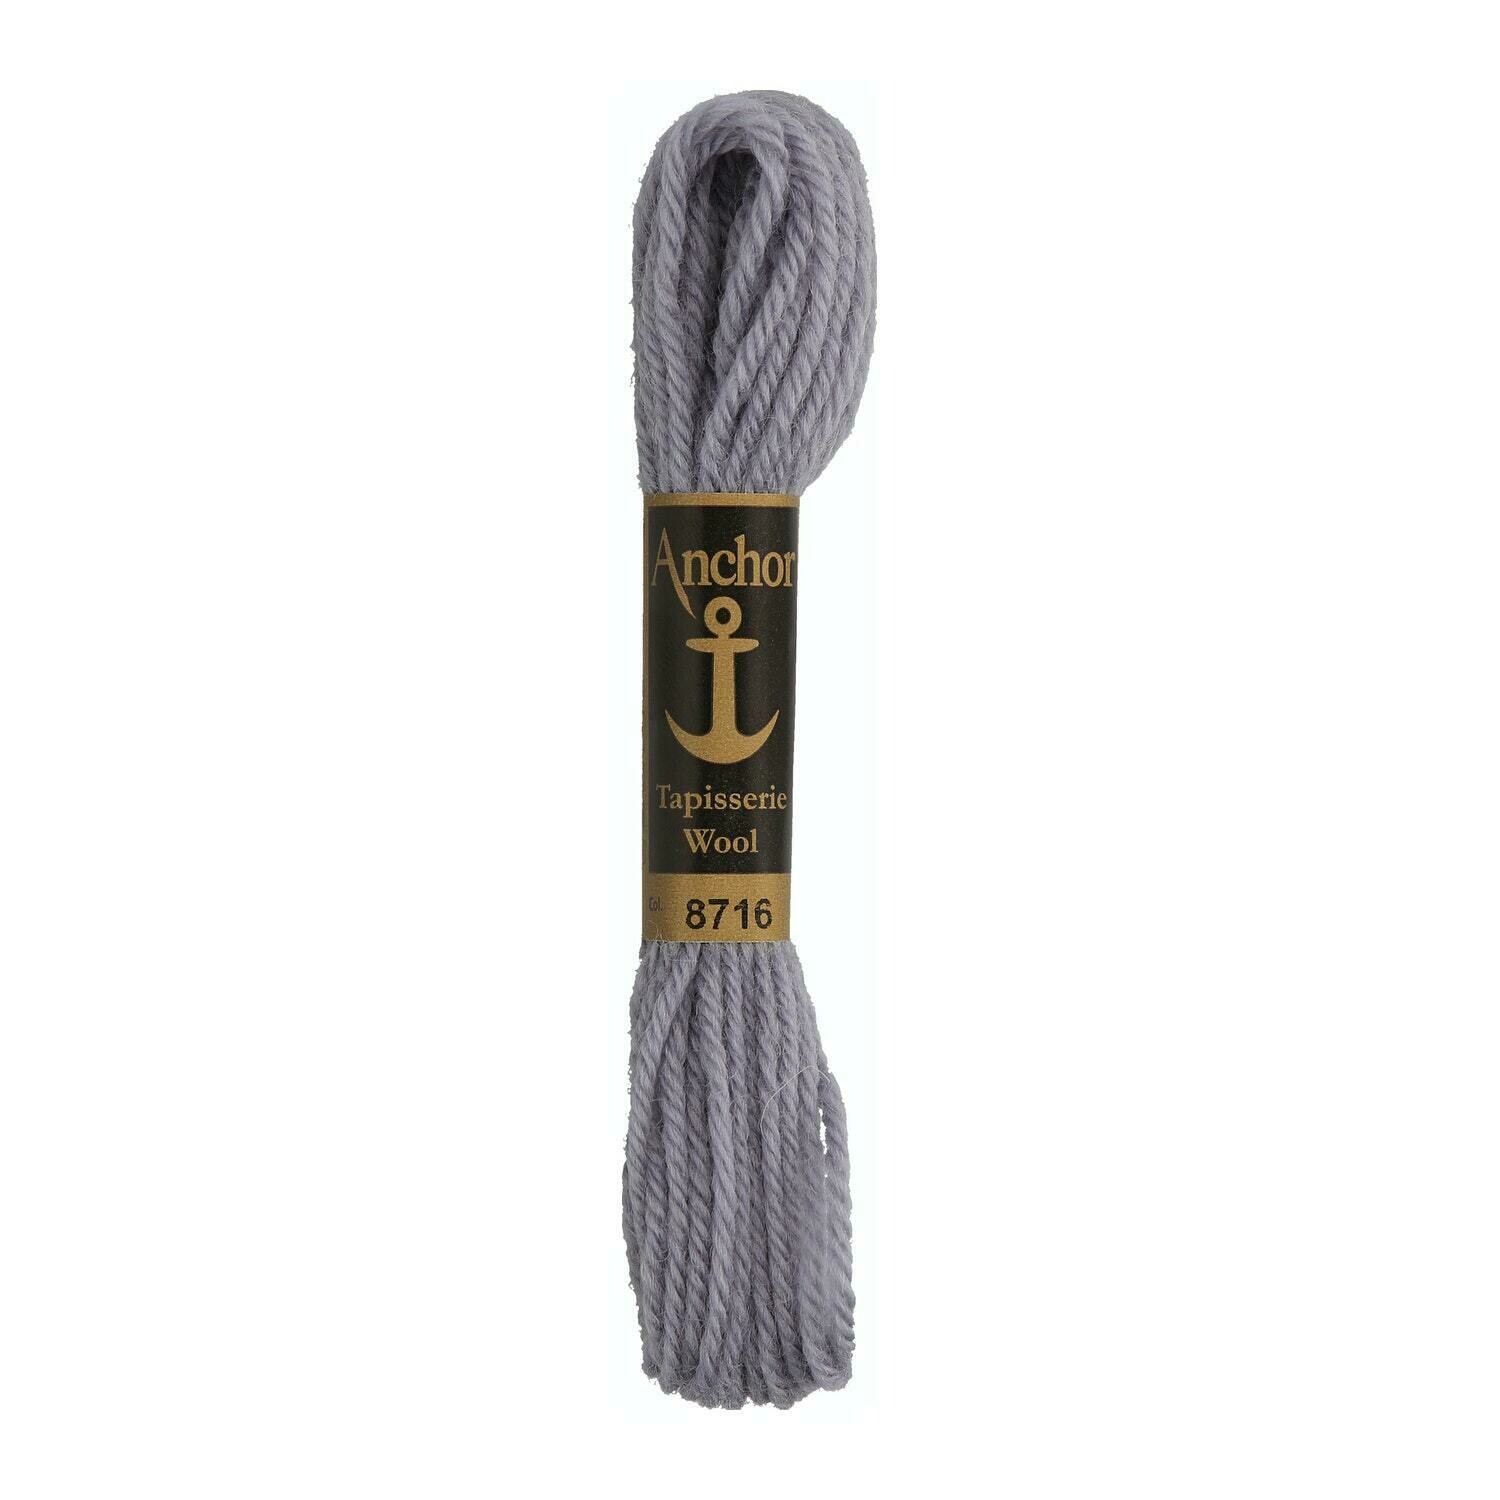 Anchor Tapisserie Wool #08716